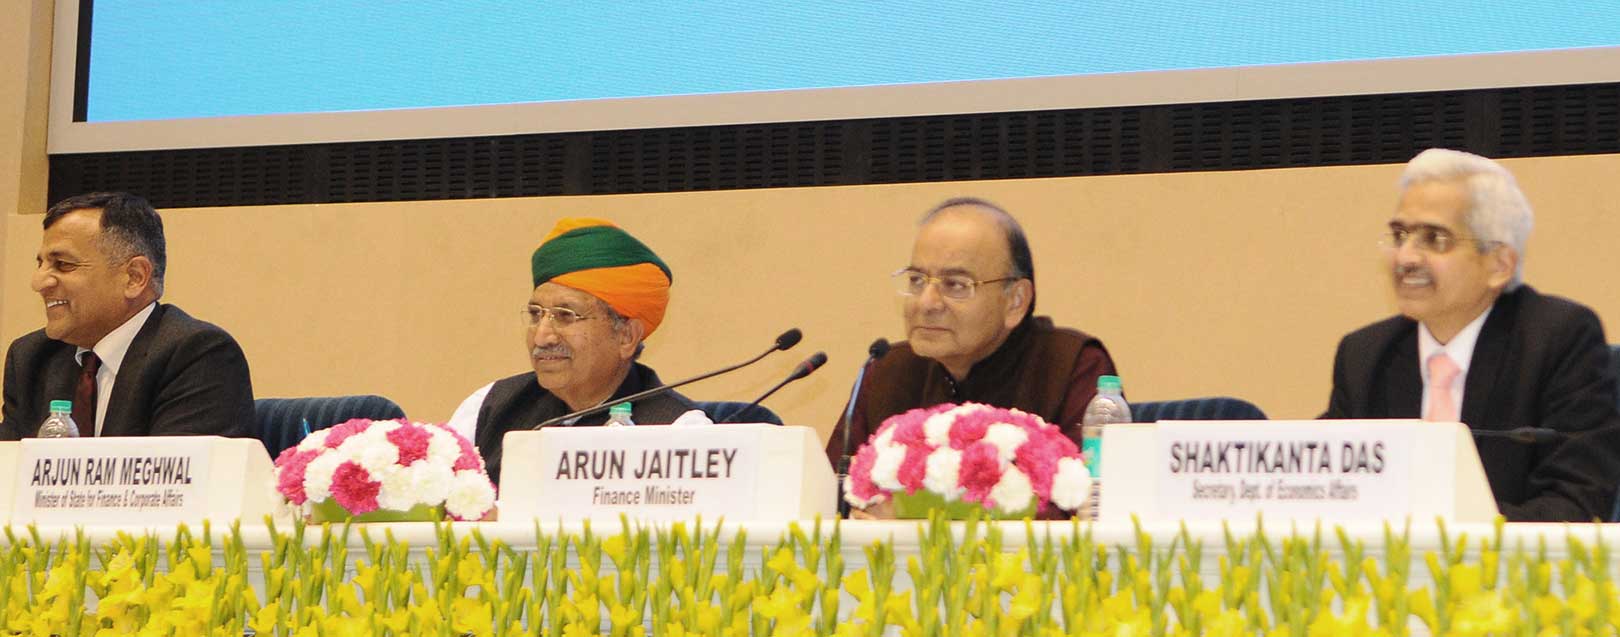 Protectionist stance will shrink global growth, warns Jaitley